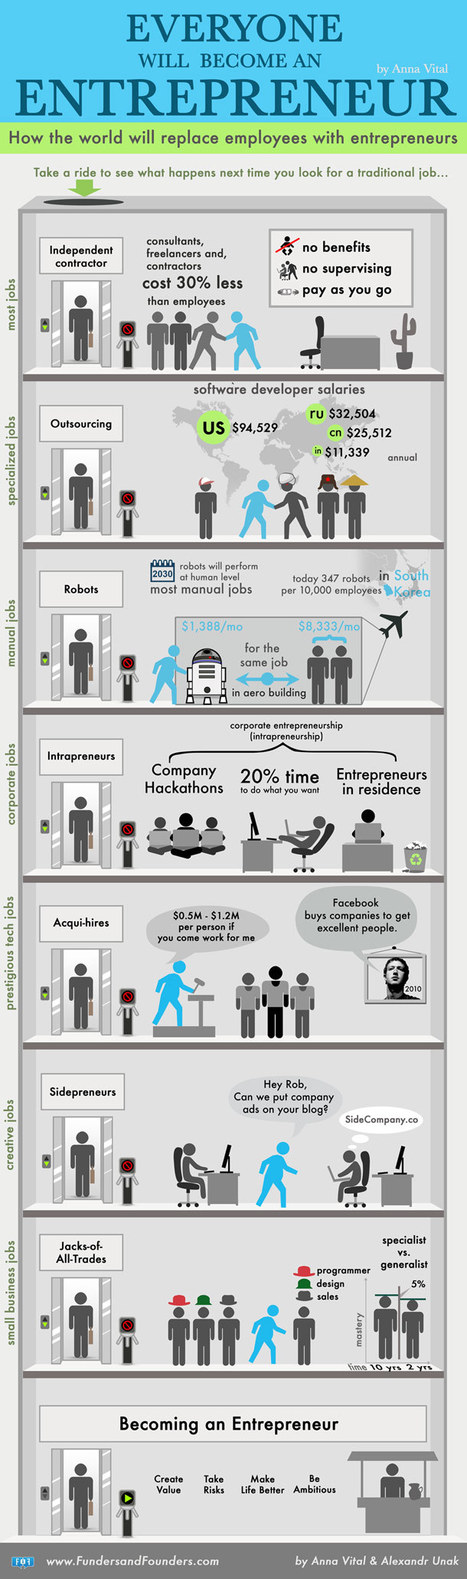 Why Everyone Will Have to Become an Entrepreneur (Infographic) | Startups and Entrepreneurship | Scoop.it